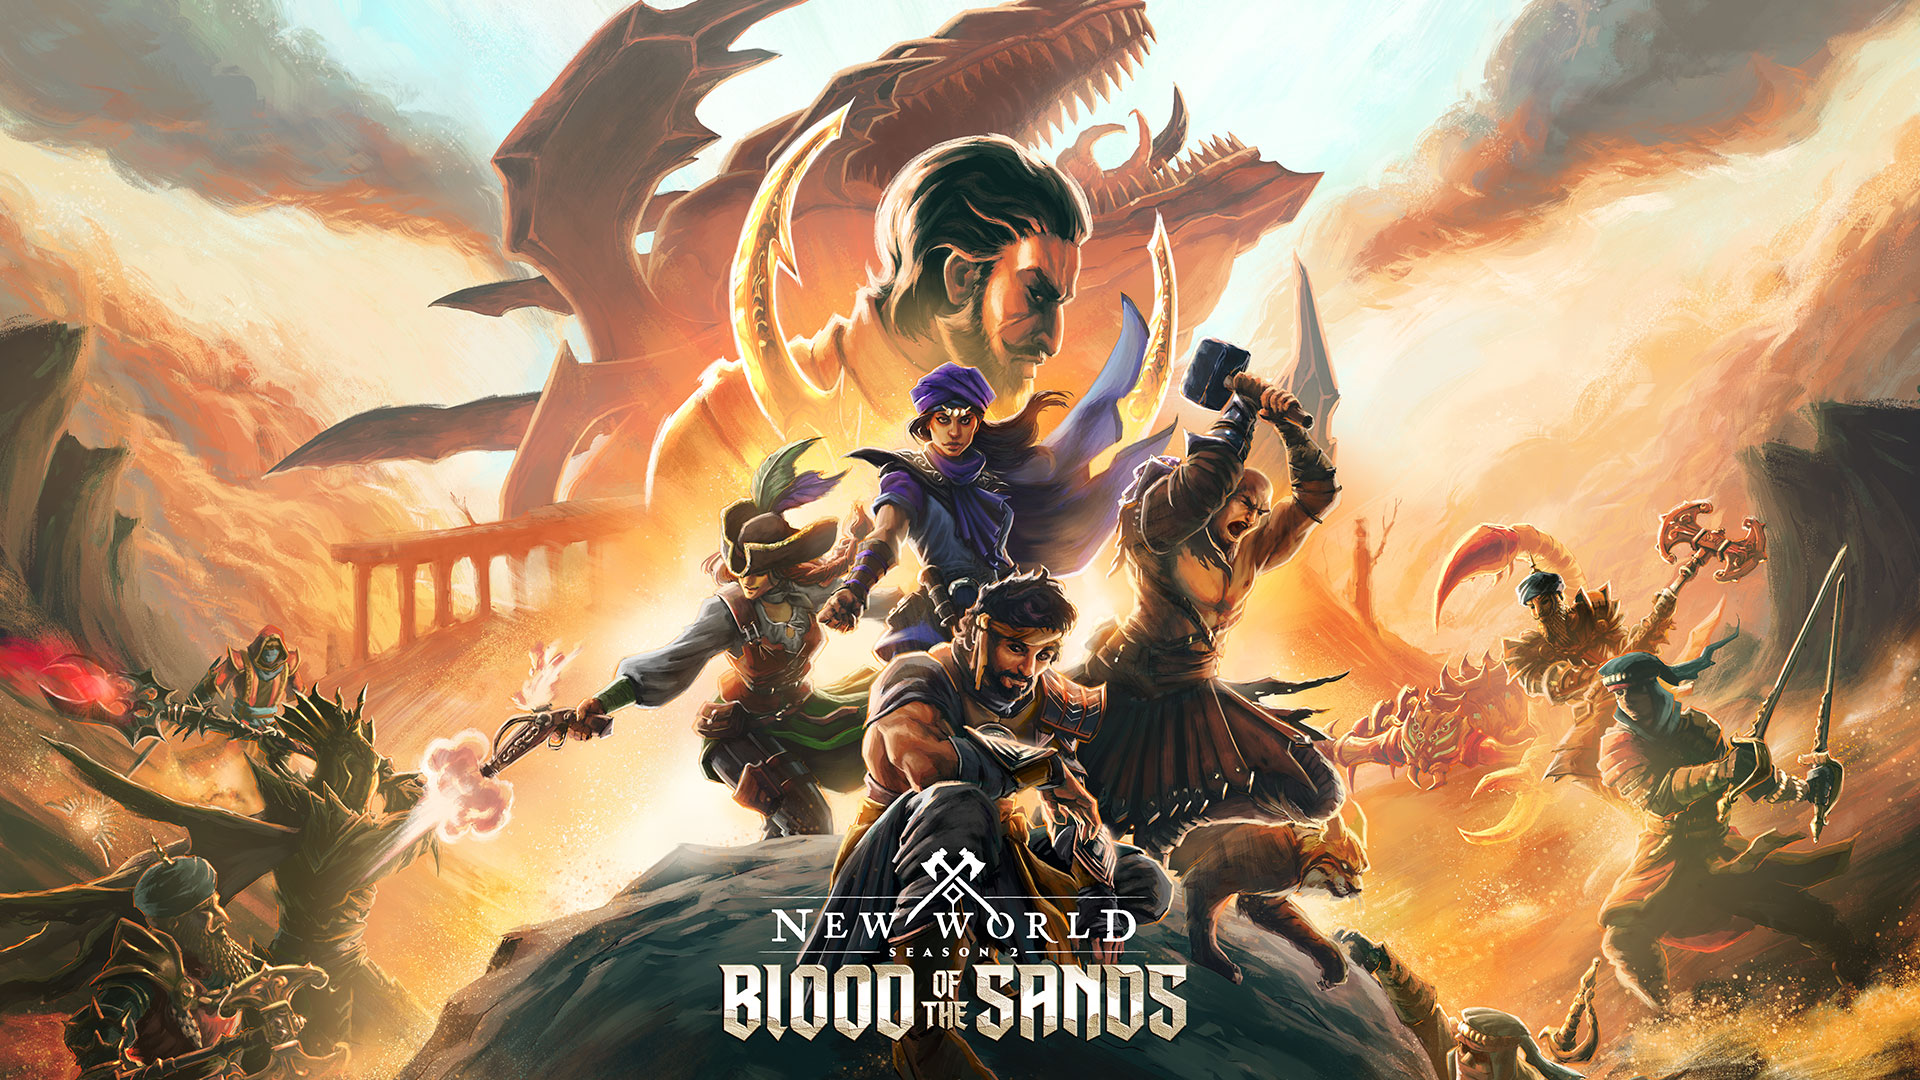 Amazon Games Announces Season 2 – Blood of the Sands for New World